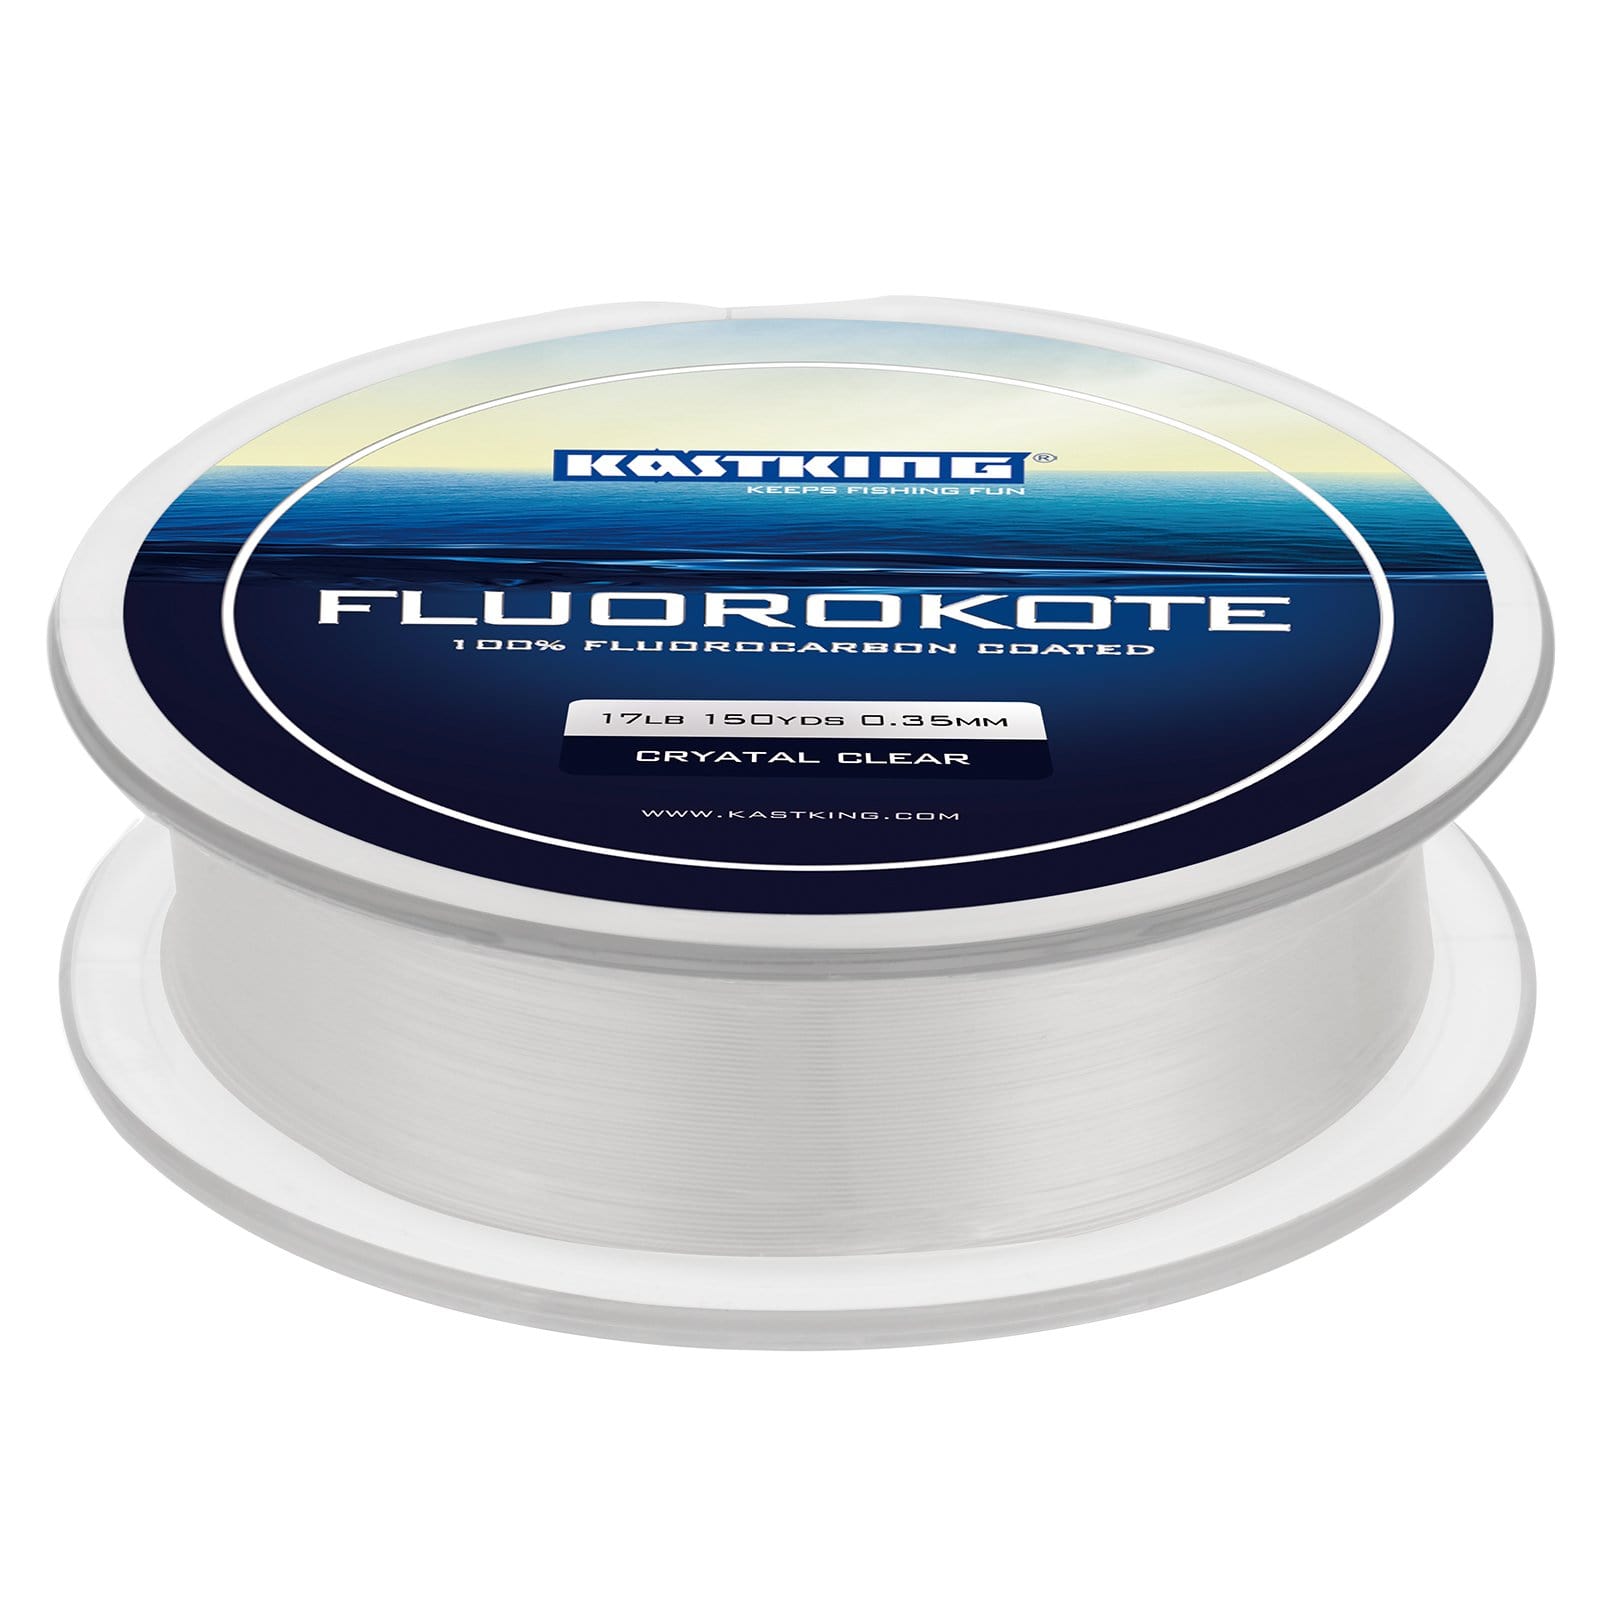 MYTH BUSTED - DOES FLUOROCARBON FISHING LINE STRETCH – KastKing